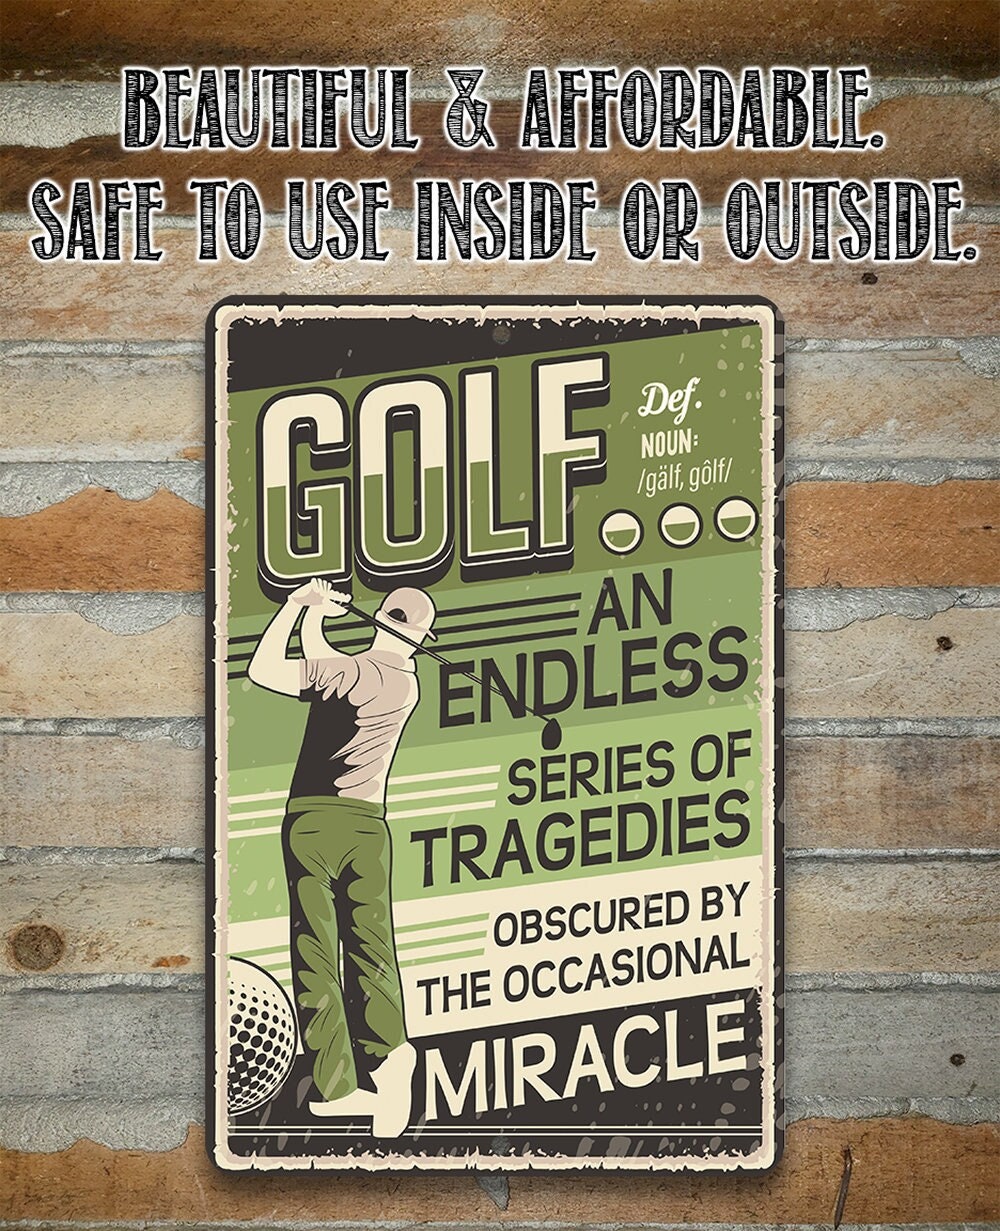 Golf An Endless Series of Tragedies Obscured By The Occasional Miracle - Metal Sign Metal Sign Lone Star Art 